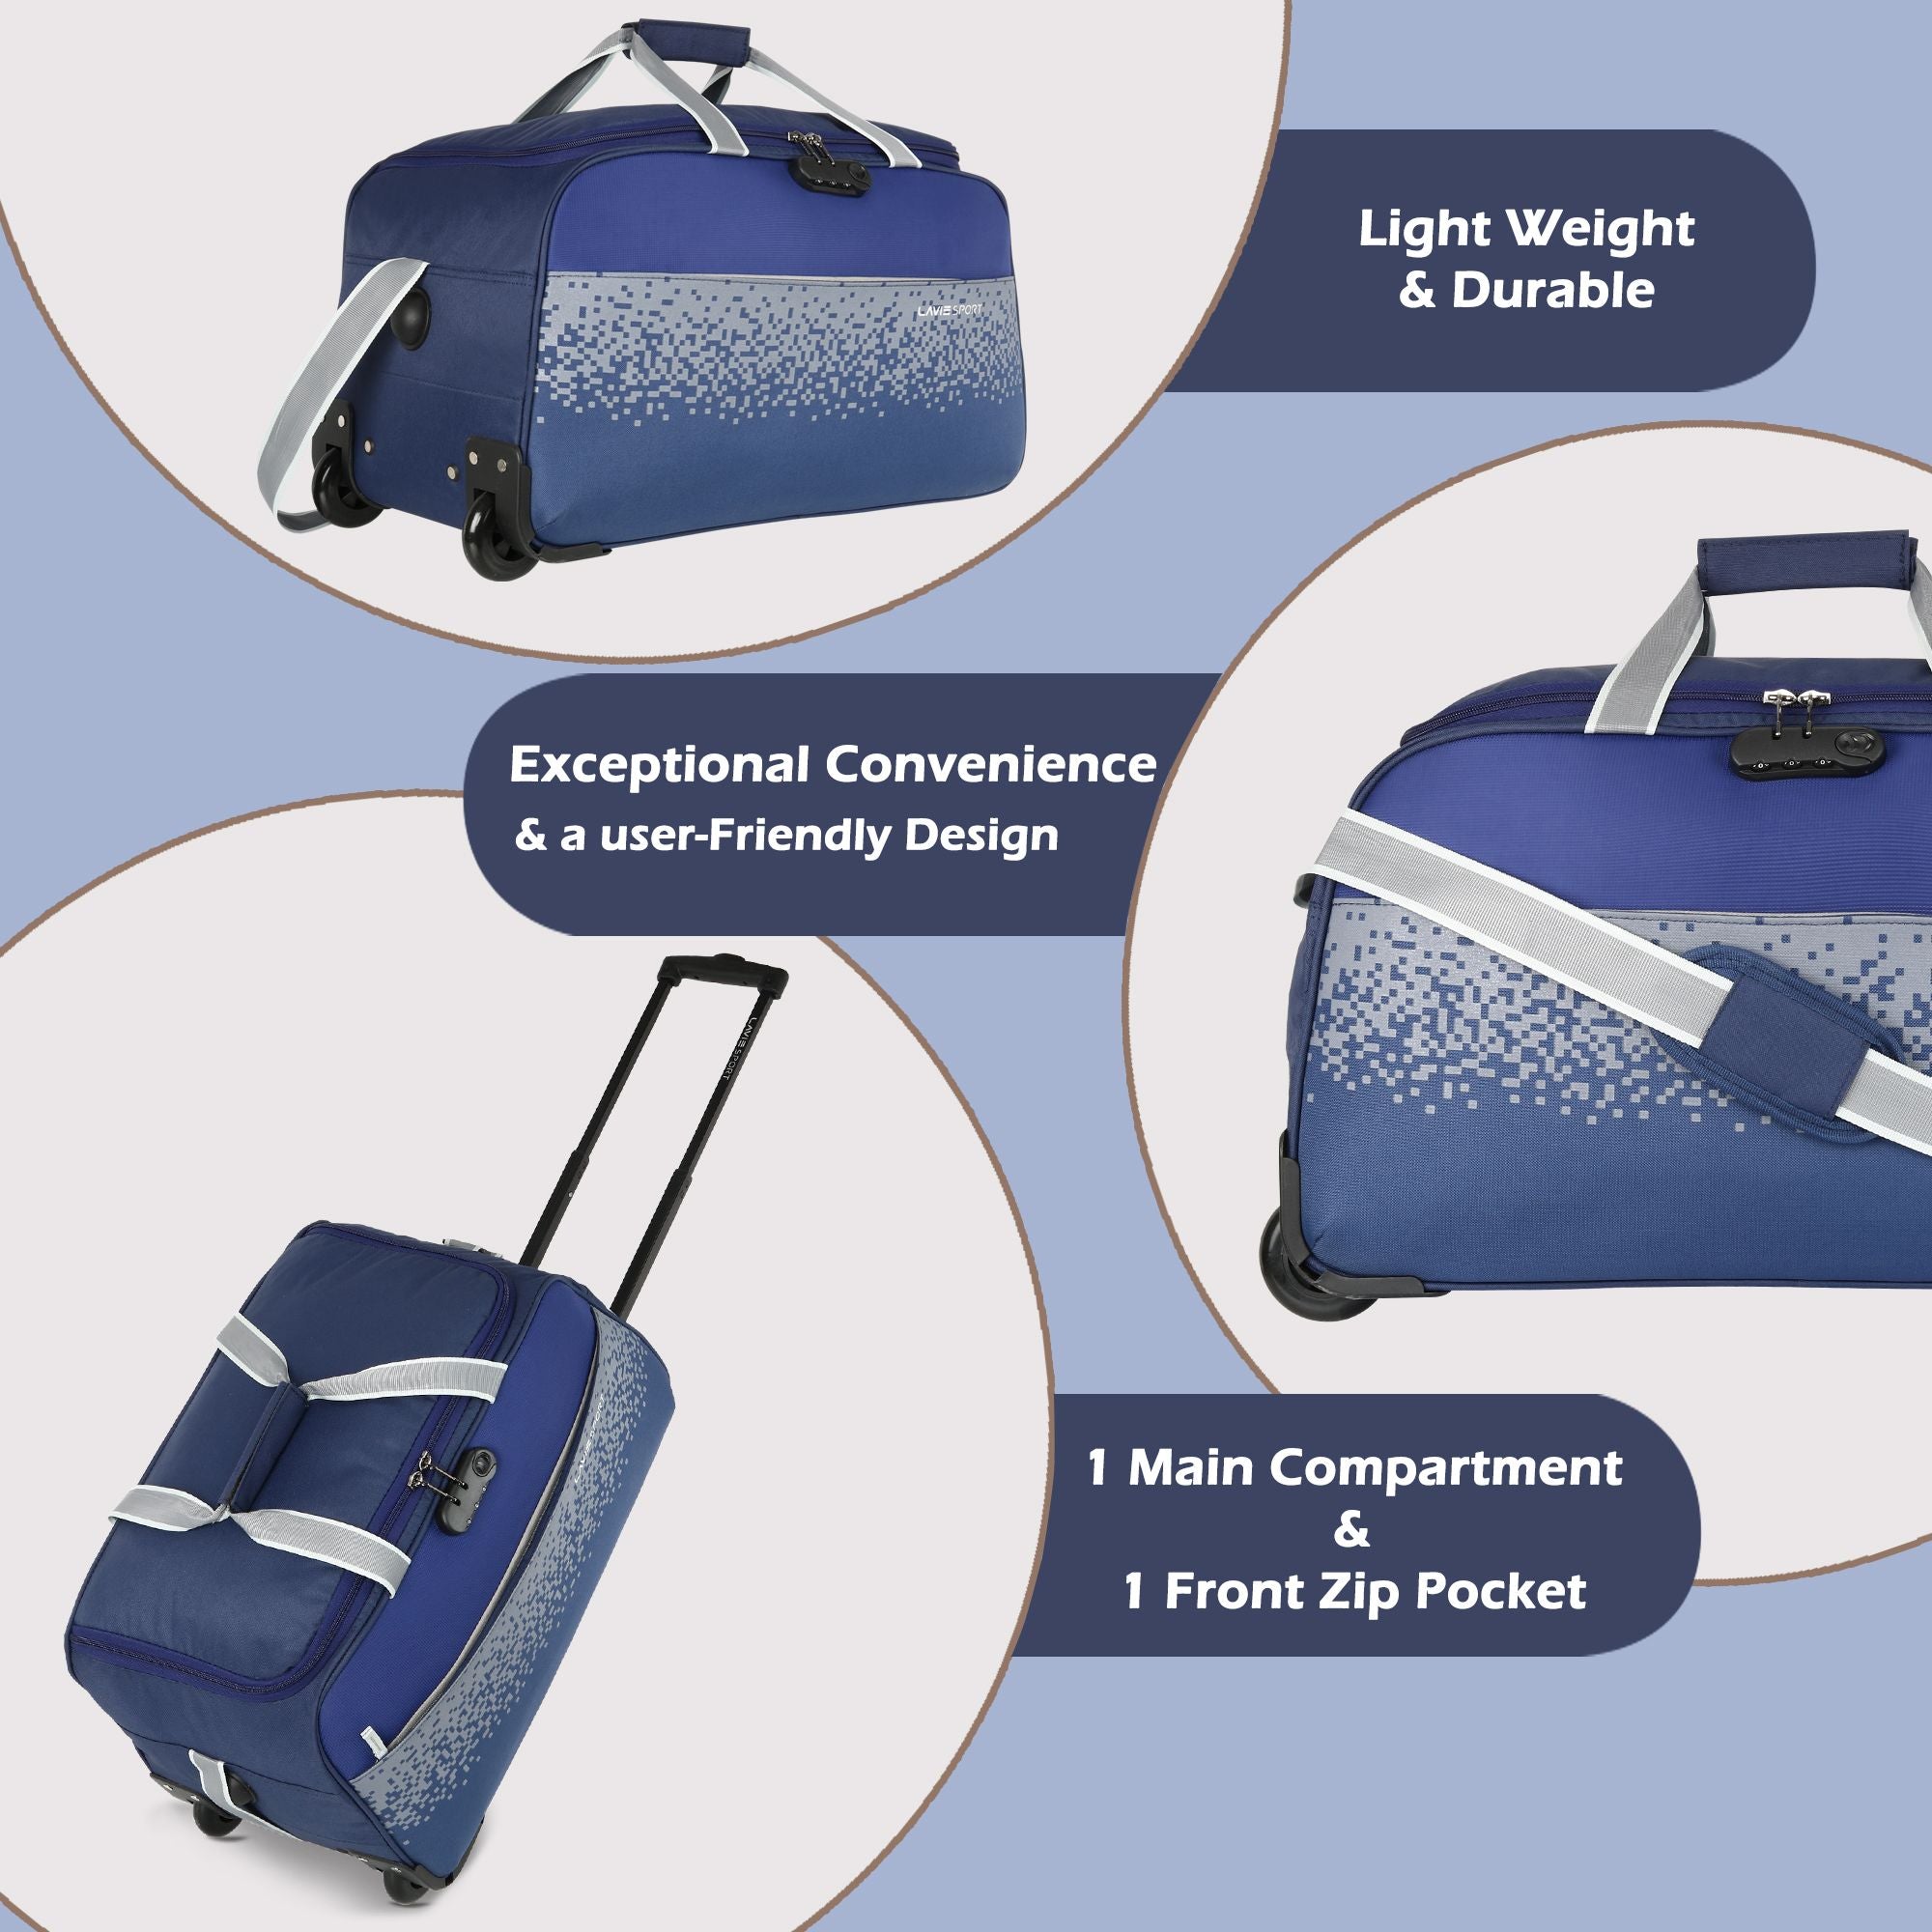 ARISTOCRAT DUFFLE RDFL DFT LUGGAGE BAG at Rs 999 | New Items in Nagpur |  ID: 21517844591